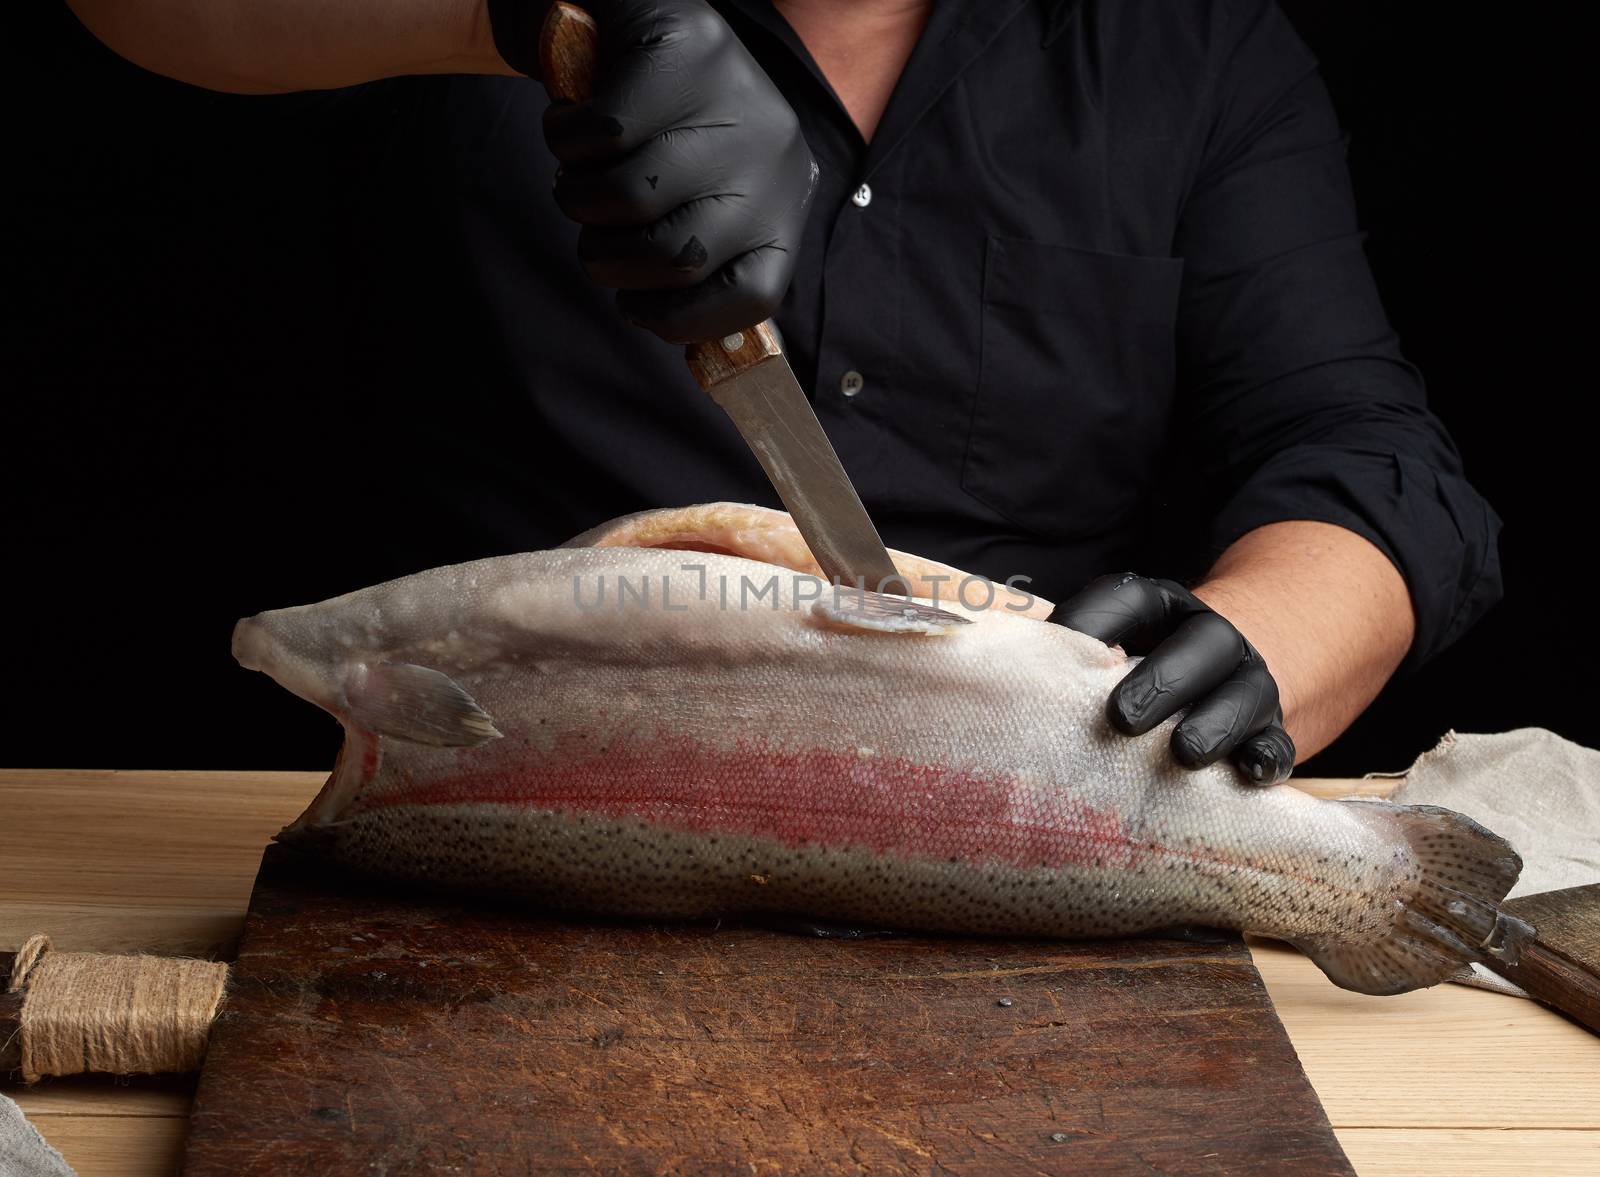 chef in black shirt and black latex gloves slices a whole fresh fish salmon on a vintage brown cutting board,  low key